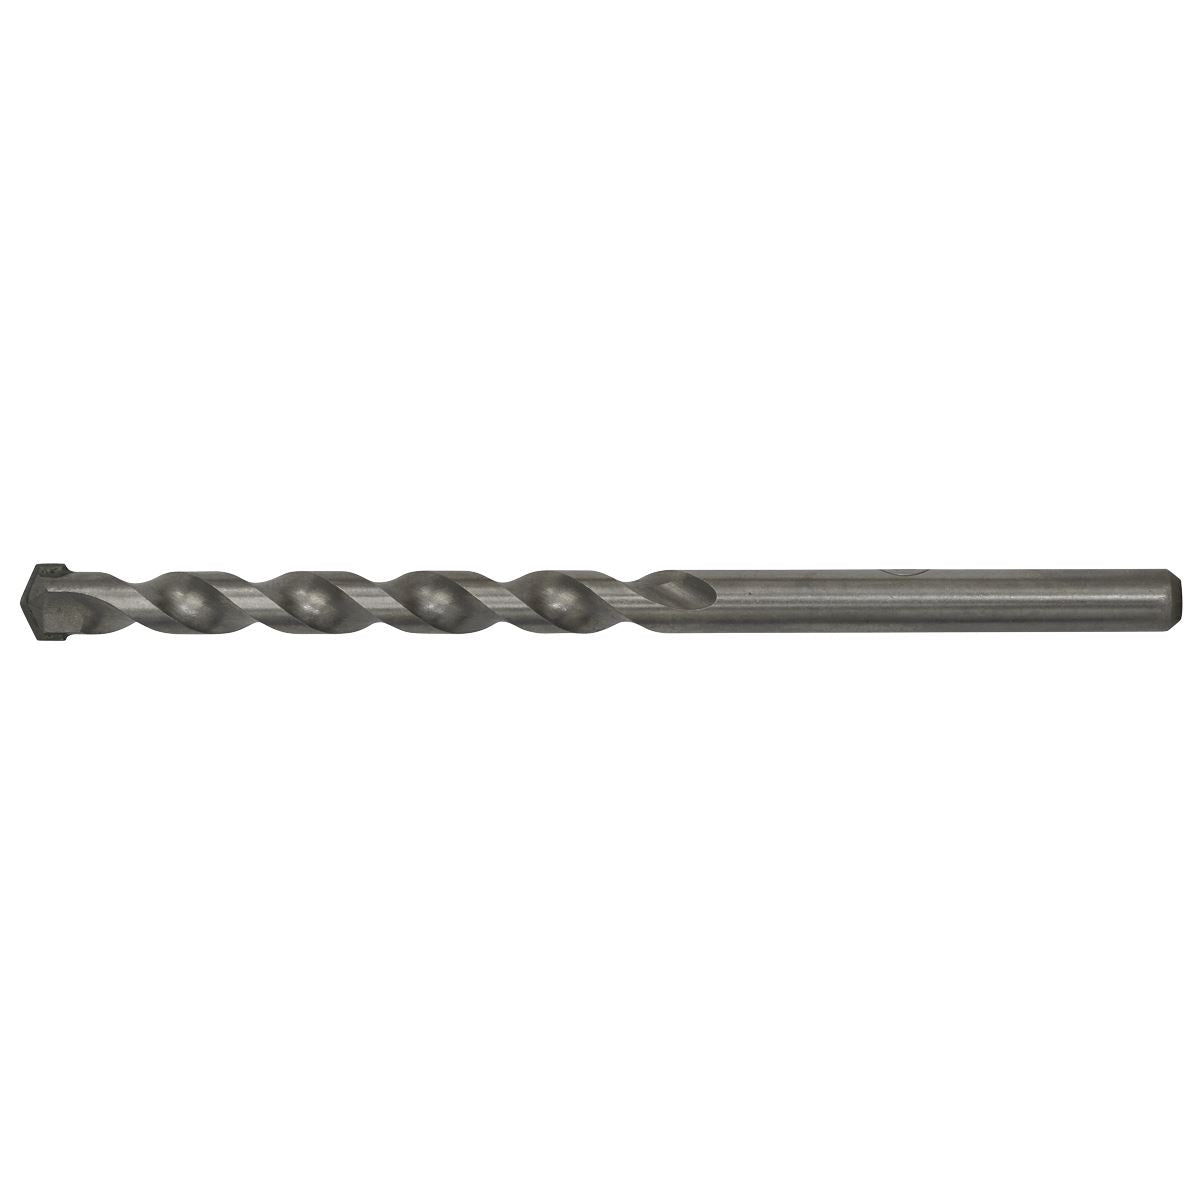 Worksafe by Sealey Straight Shank Rotary Impact Drill Bit Ø10 x 150mm